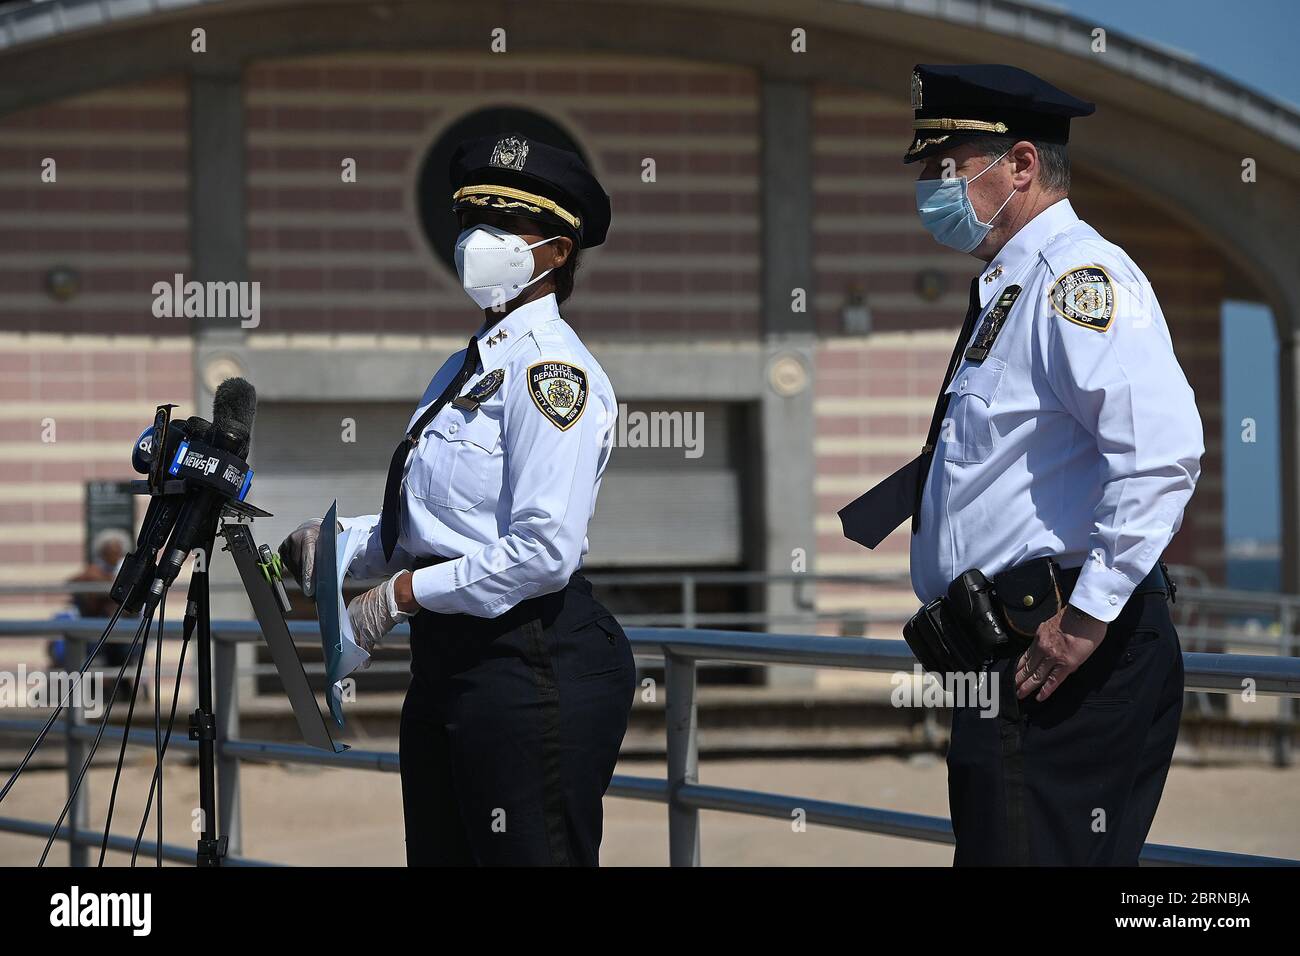 (L-R) NYPD officers Juanita Holmes, Commanding Officer of the School Safety Division and Brian Conroy, Assistant Chief of Patrol Borough Brooklyn South, hold a joint press conference along the Coney Island boardwalk, regarding security measures that will be in place during the upcoming Memorial Day weekend, in the Brooklyn borough of New York City, NY, May 21, 2020. NYPD officers will be patrolling the beaches for proper social distancing and handing out masks and beachgoers will only be able to enter water ankle deep. (Anthony Behar/Sipa USA) Stock Photo